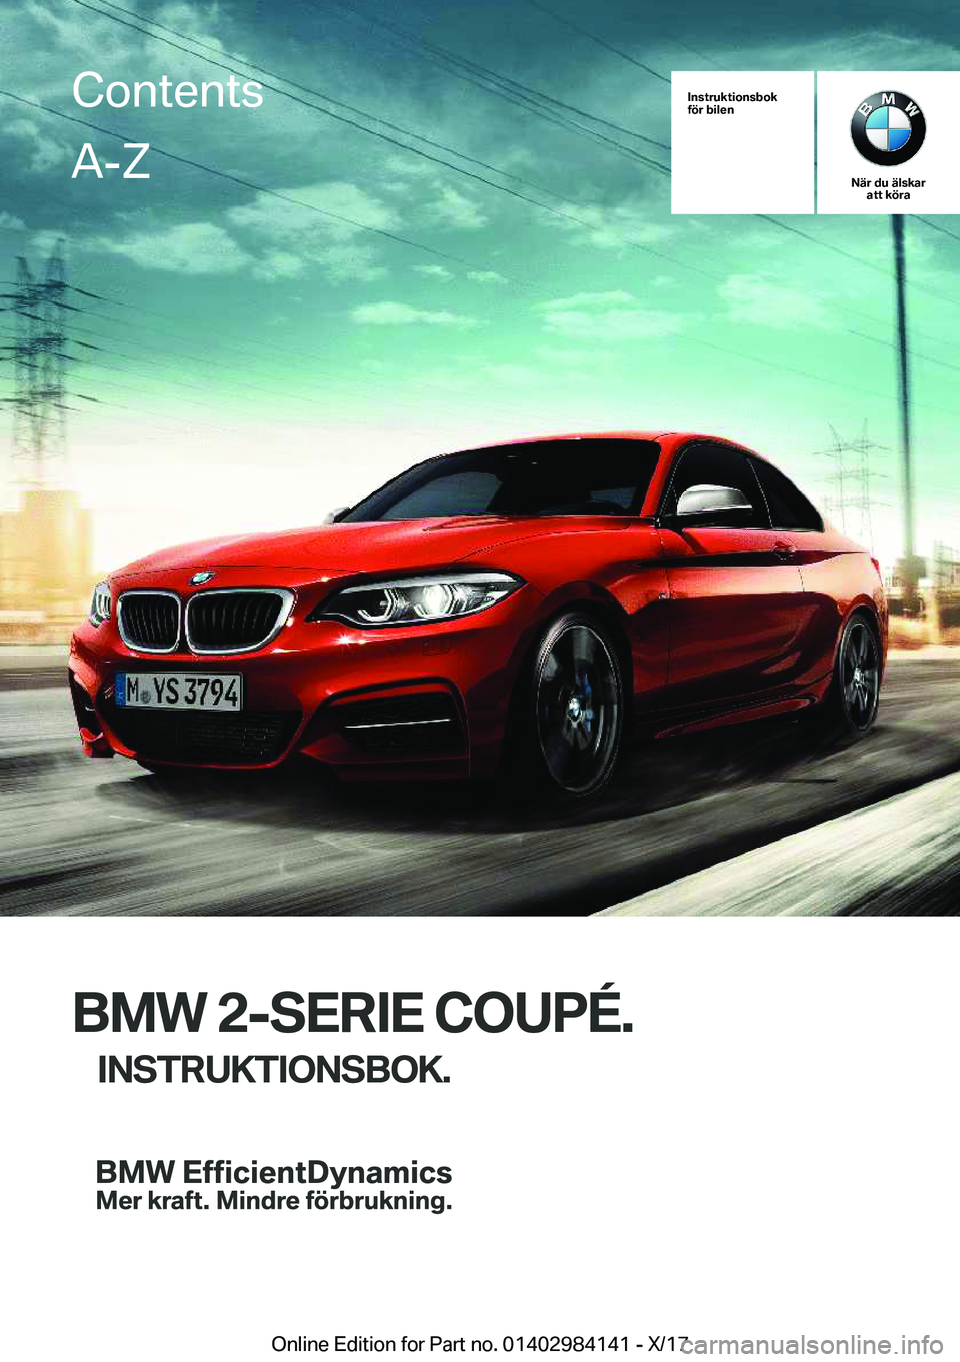 BMW 2 SERIES COUPE 2018  InstruktionsbÖcker (in Swedish) �I�n�s�t�r�u�k�t�i�o�n�s�b�o�k
�f�